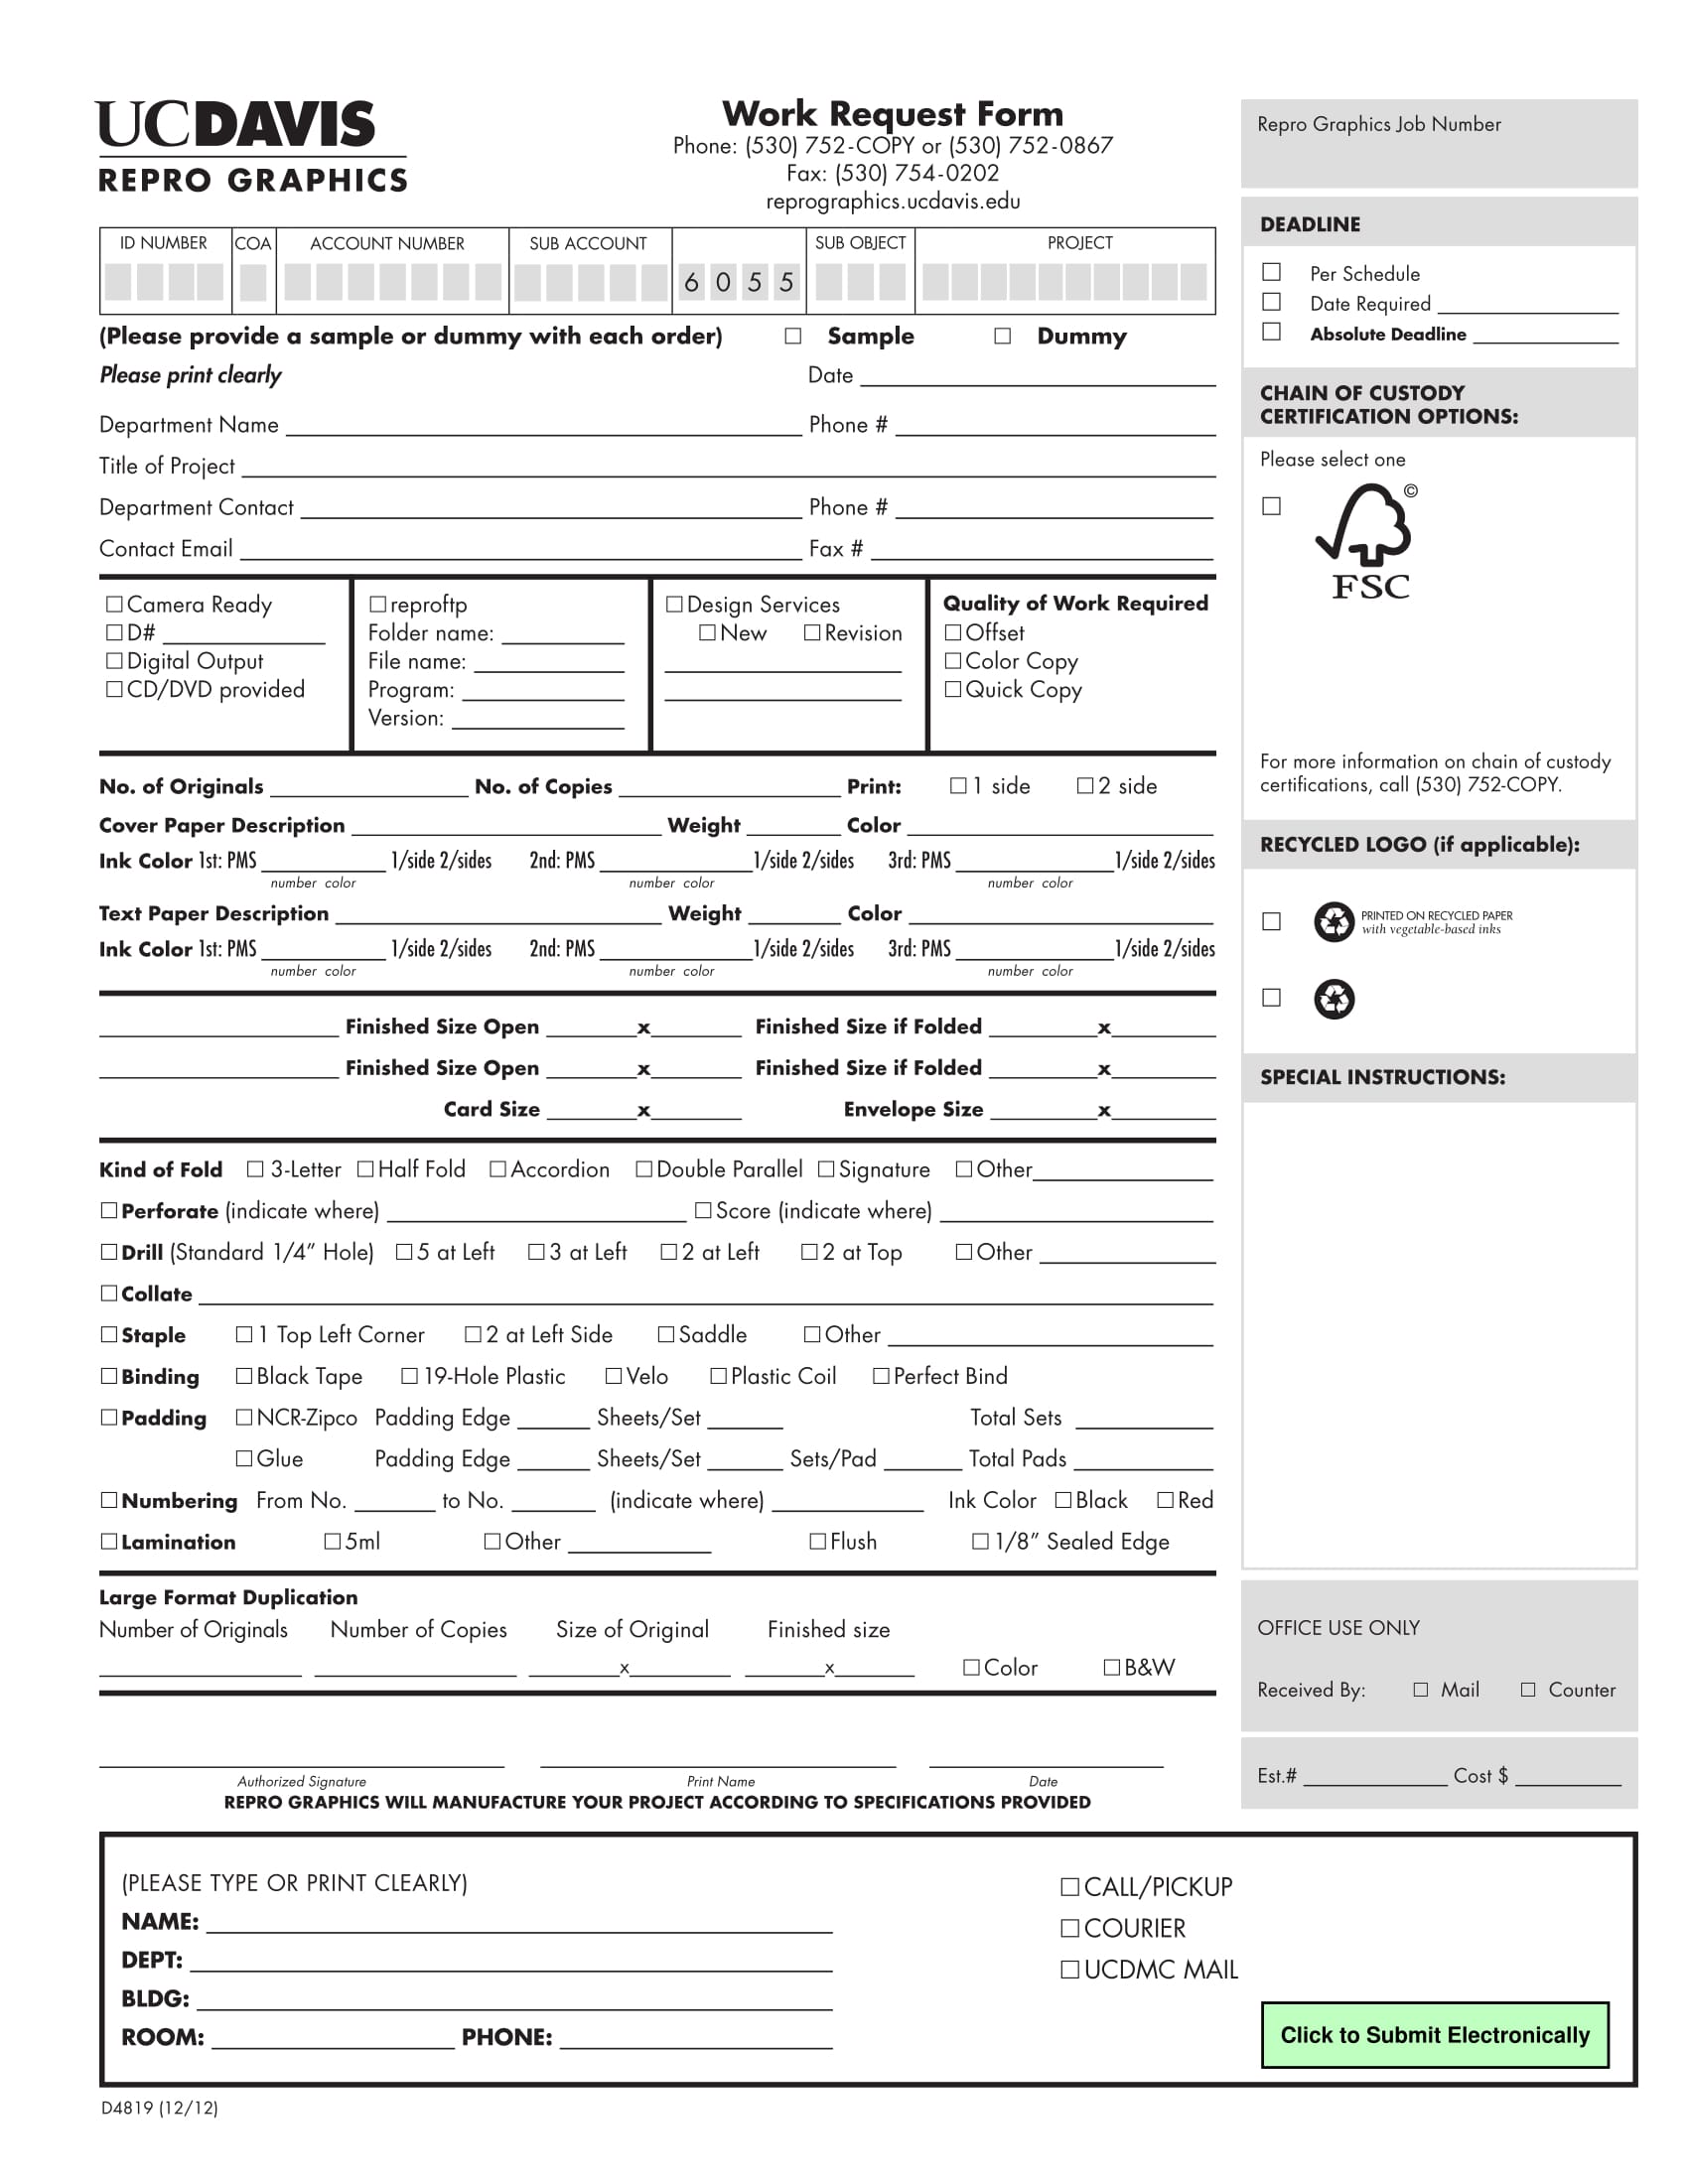 work request form in pdf 11